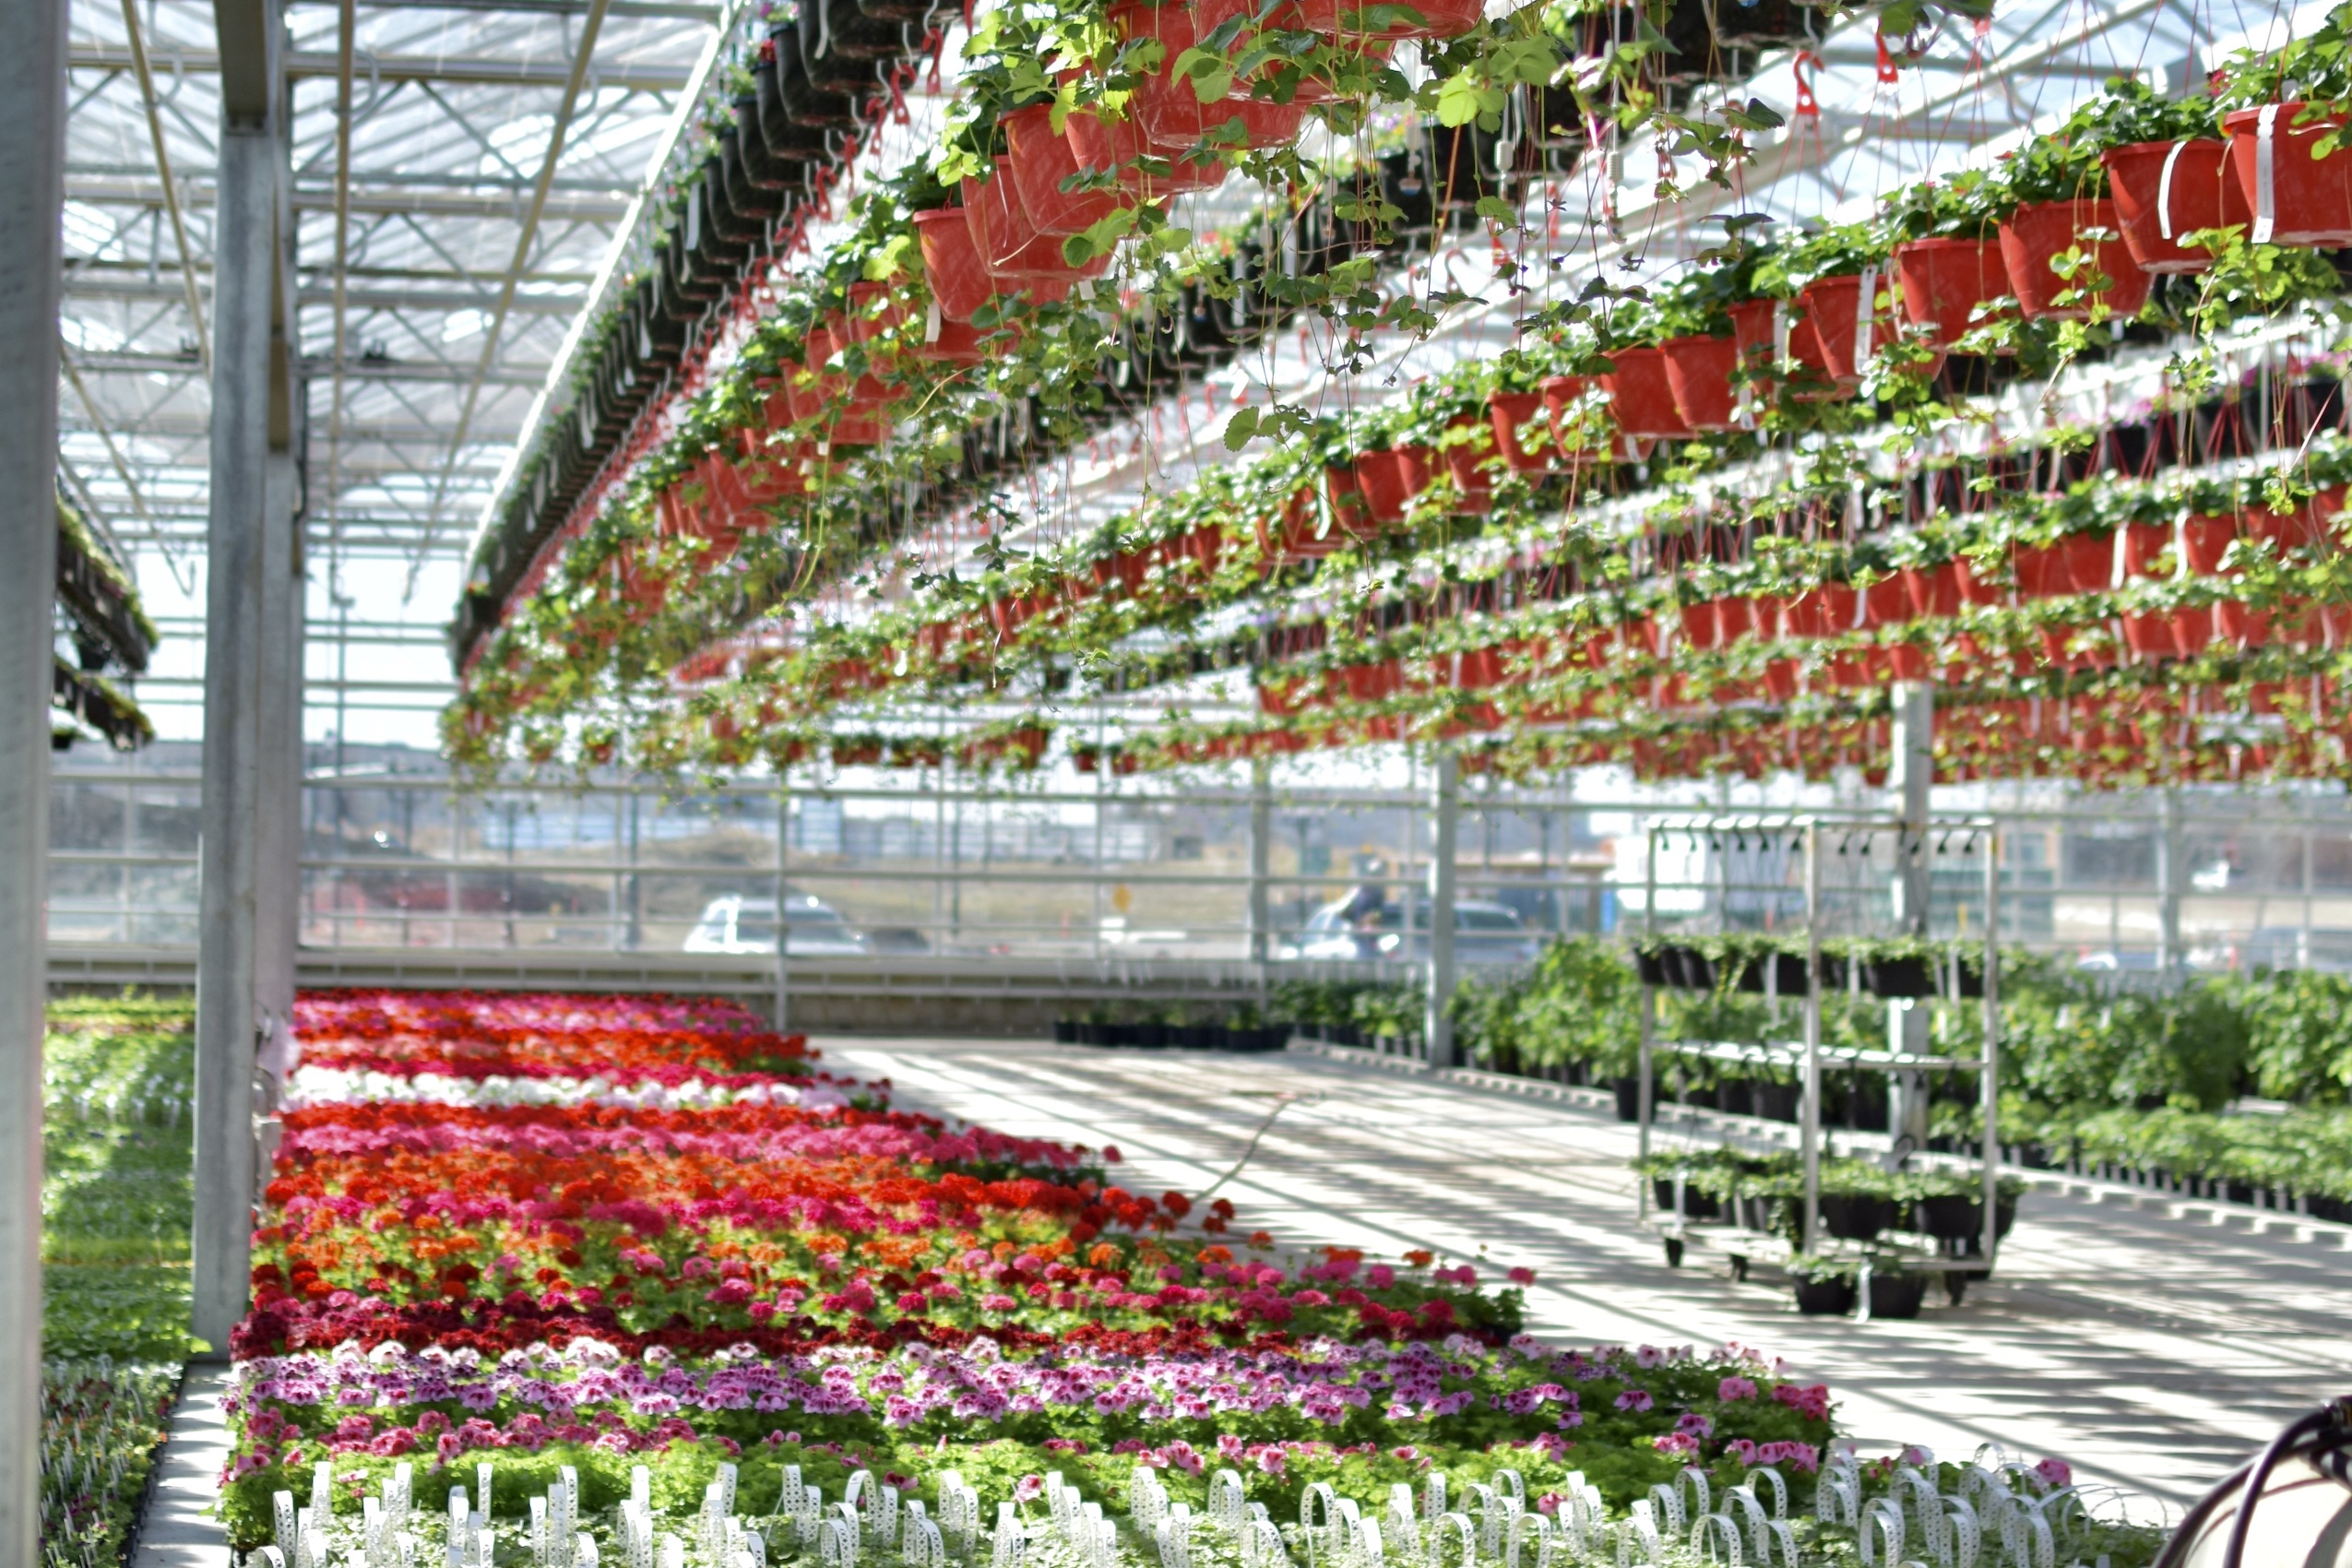 St. Albert garden centre stocked with rows of bedding plants.